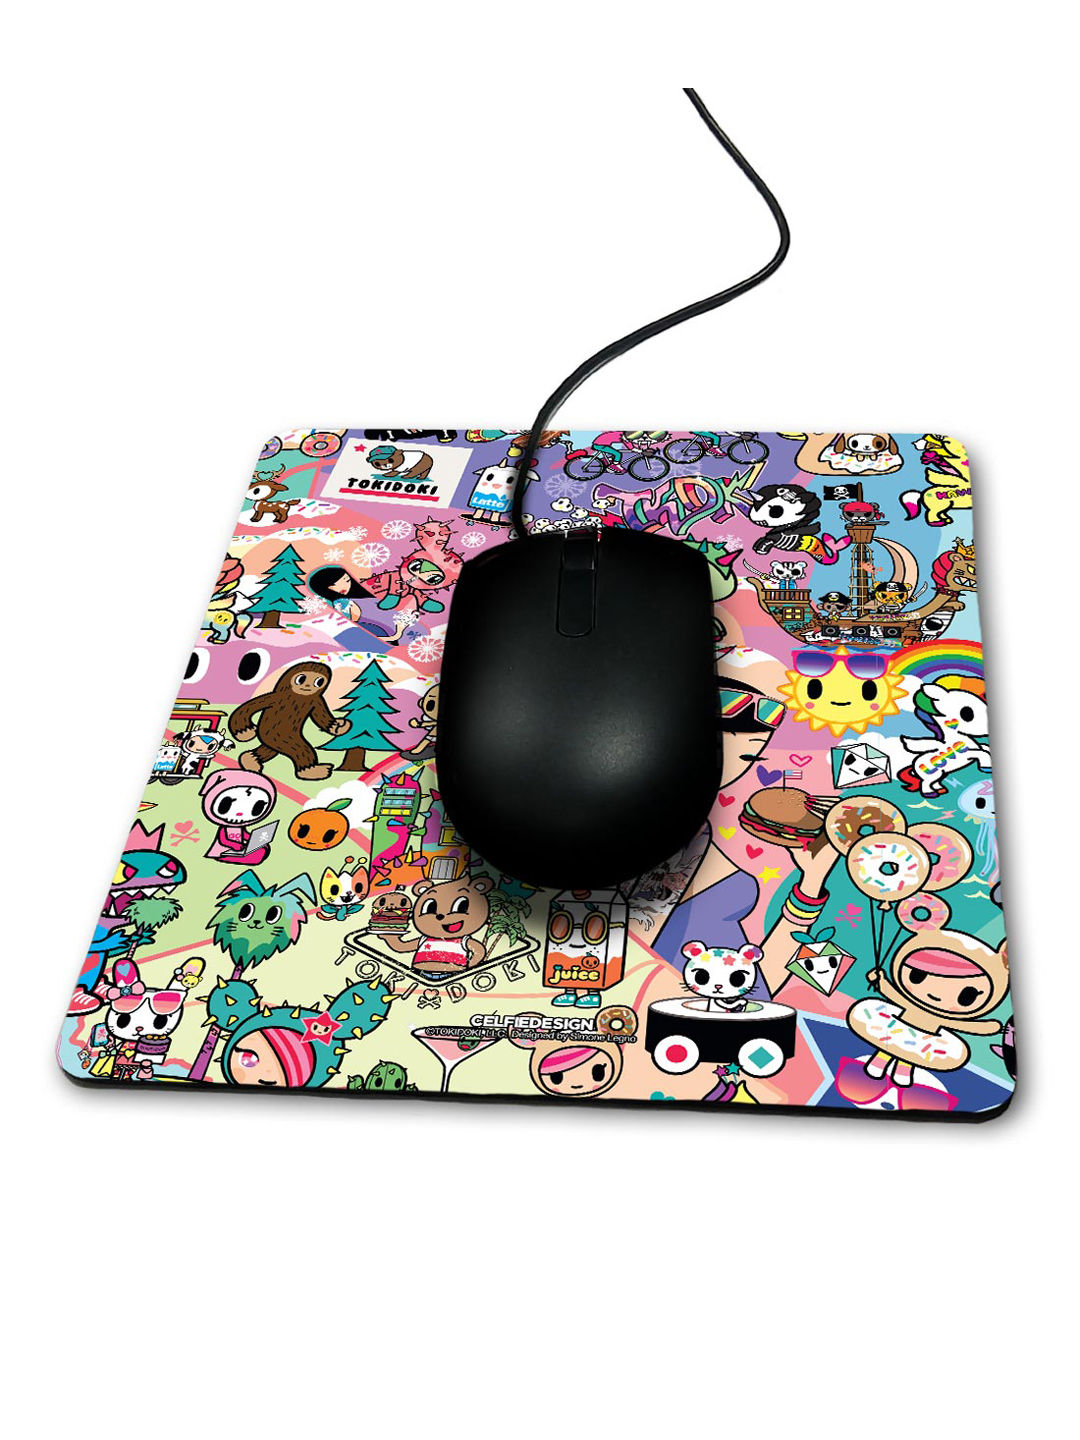 Buy td wallpaper mouse pads online tokidoki store mouse pads